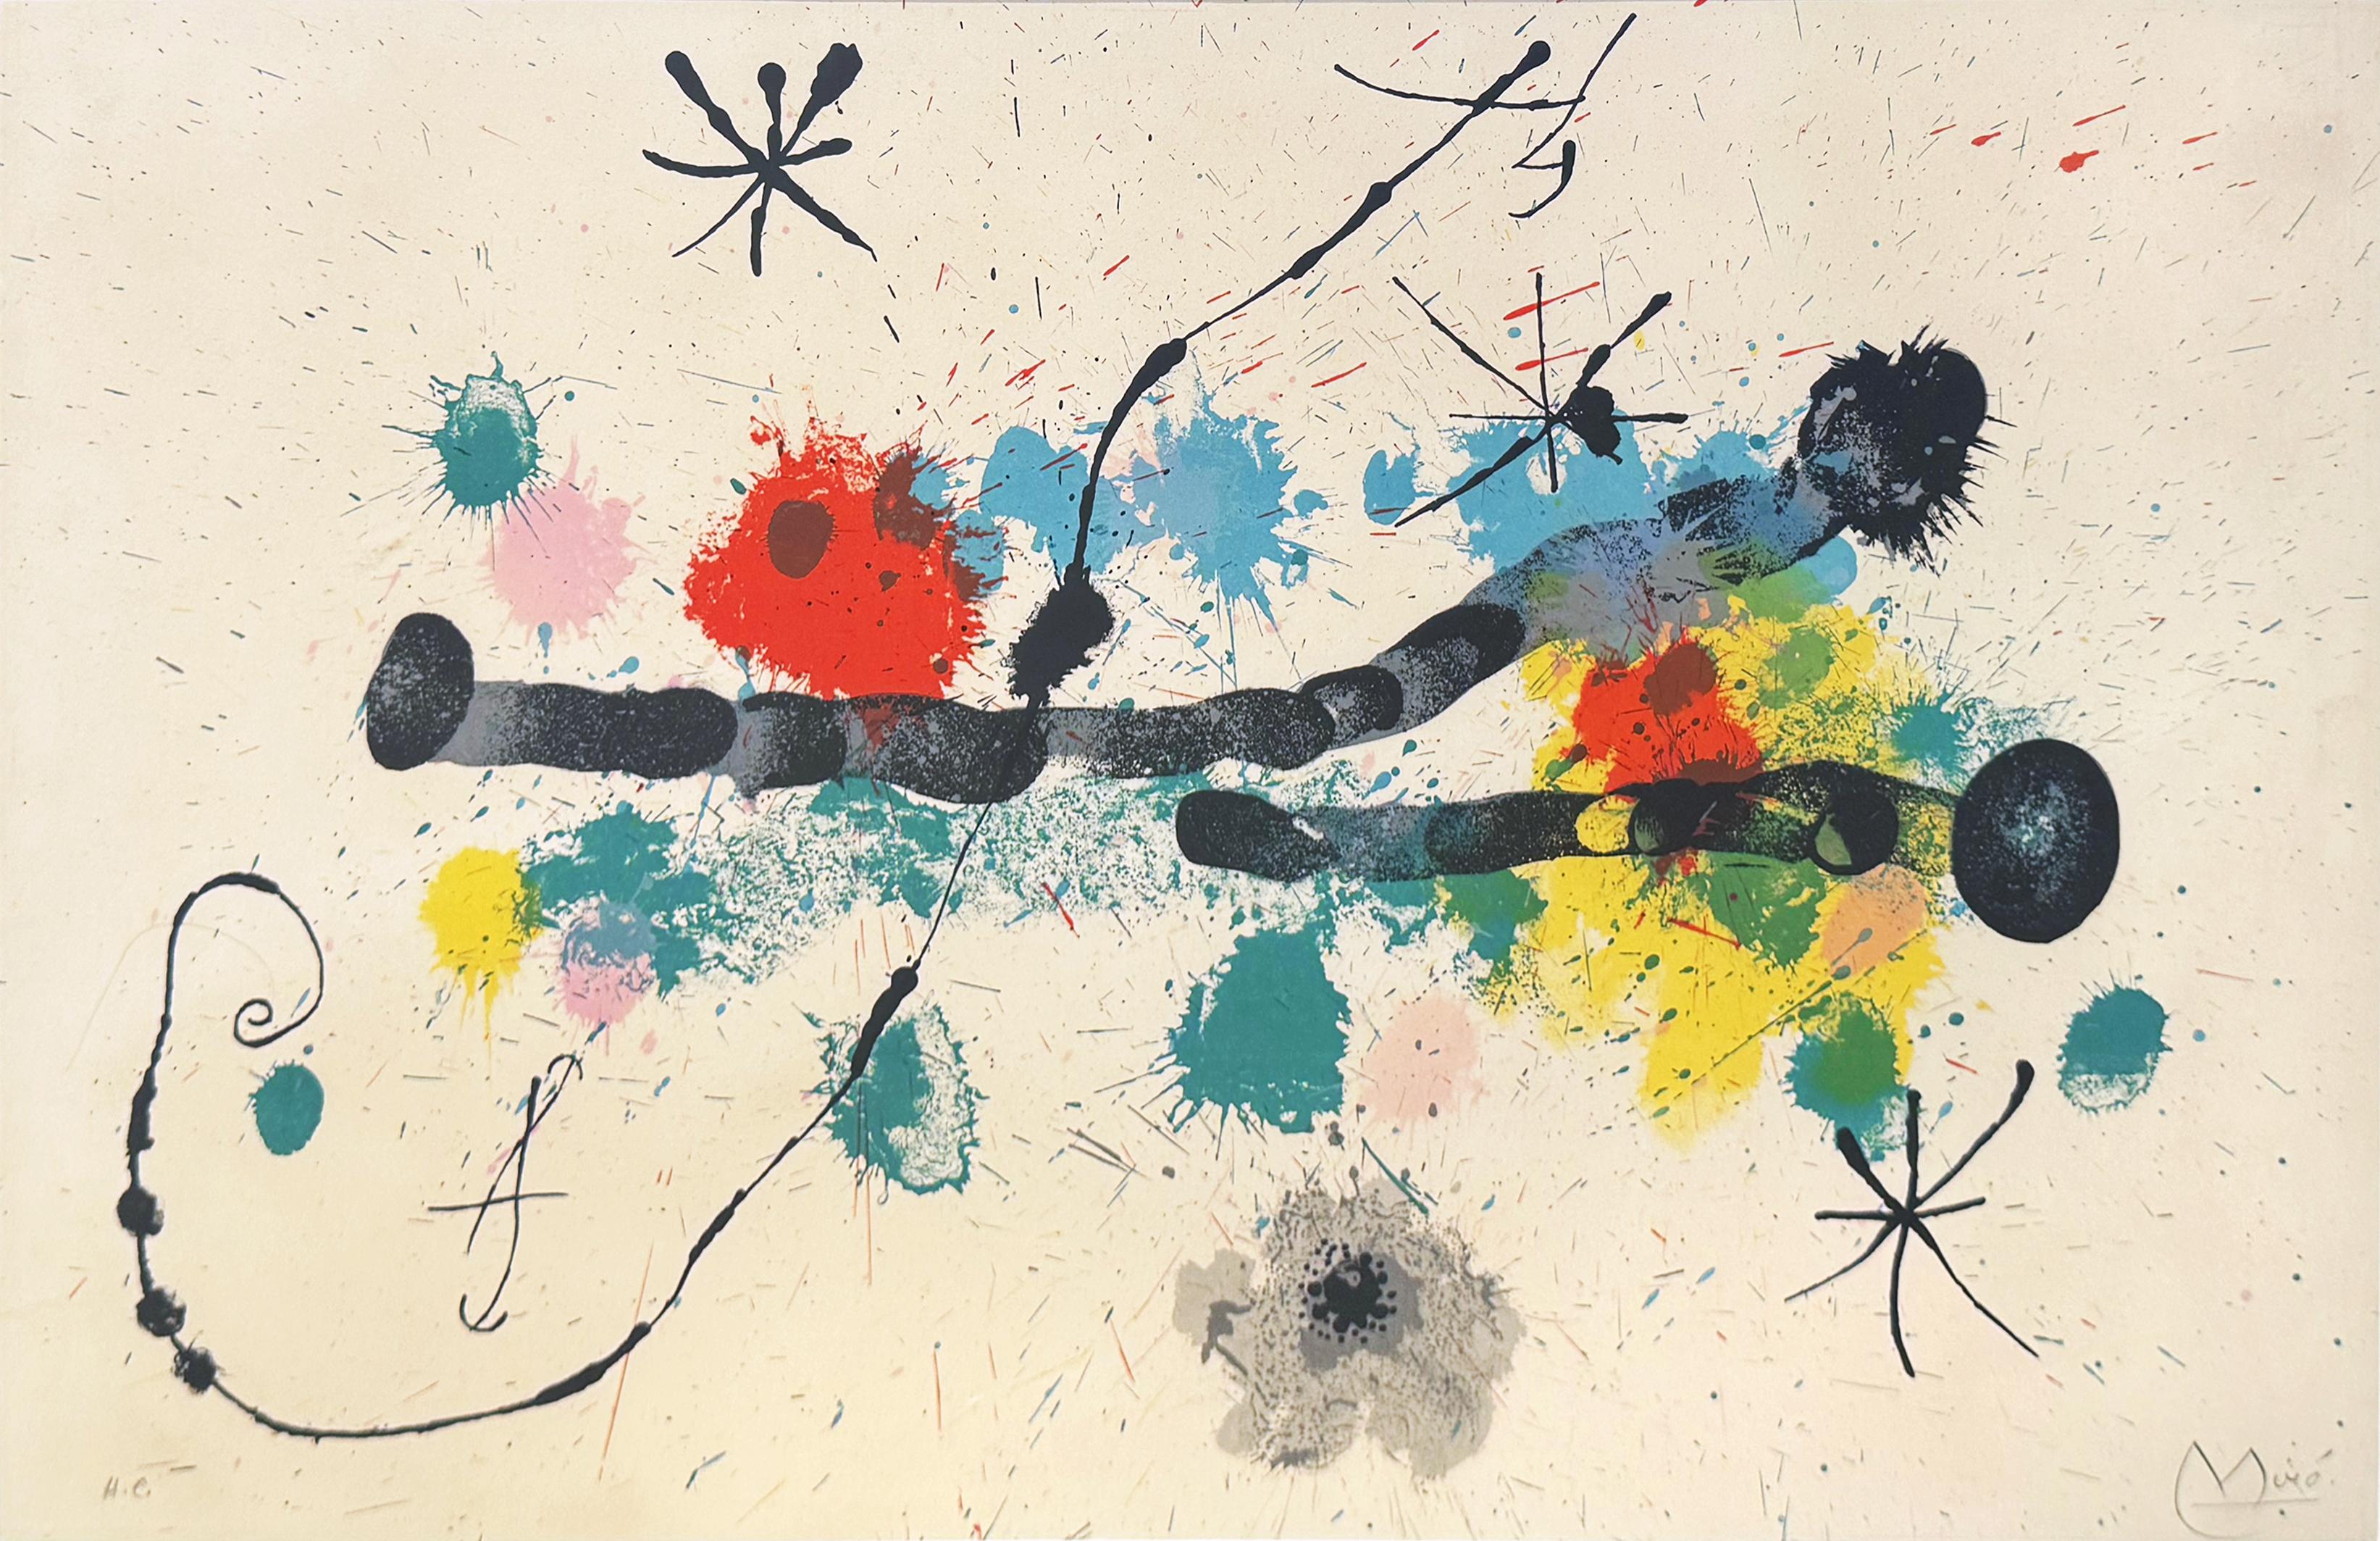 Joan Miró Abstract Print - Je Travaille Comme Un Jardinier (I Work Like a Gardener)